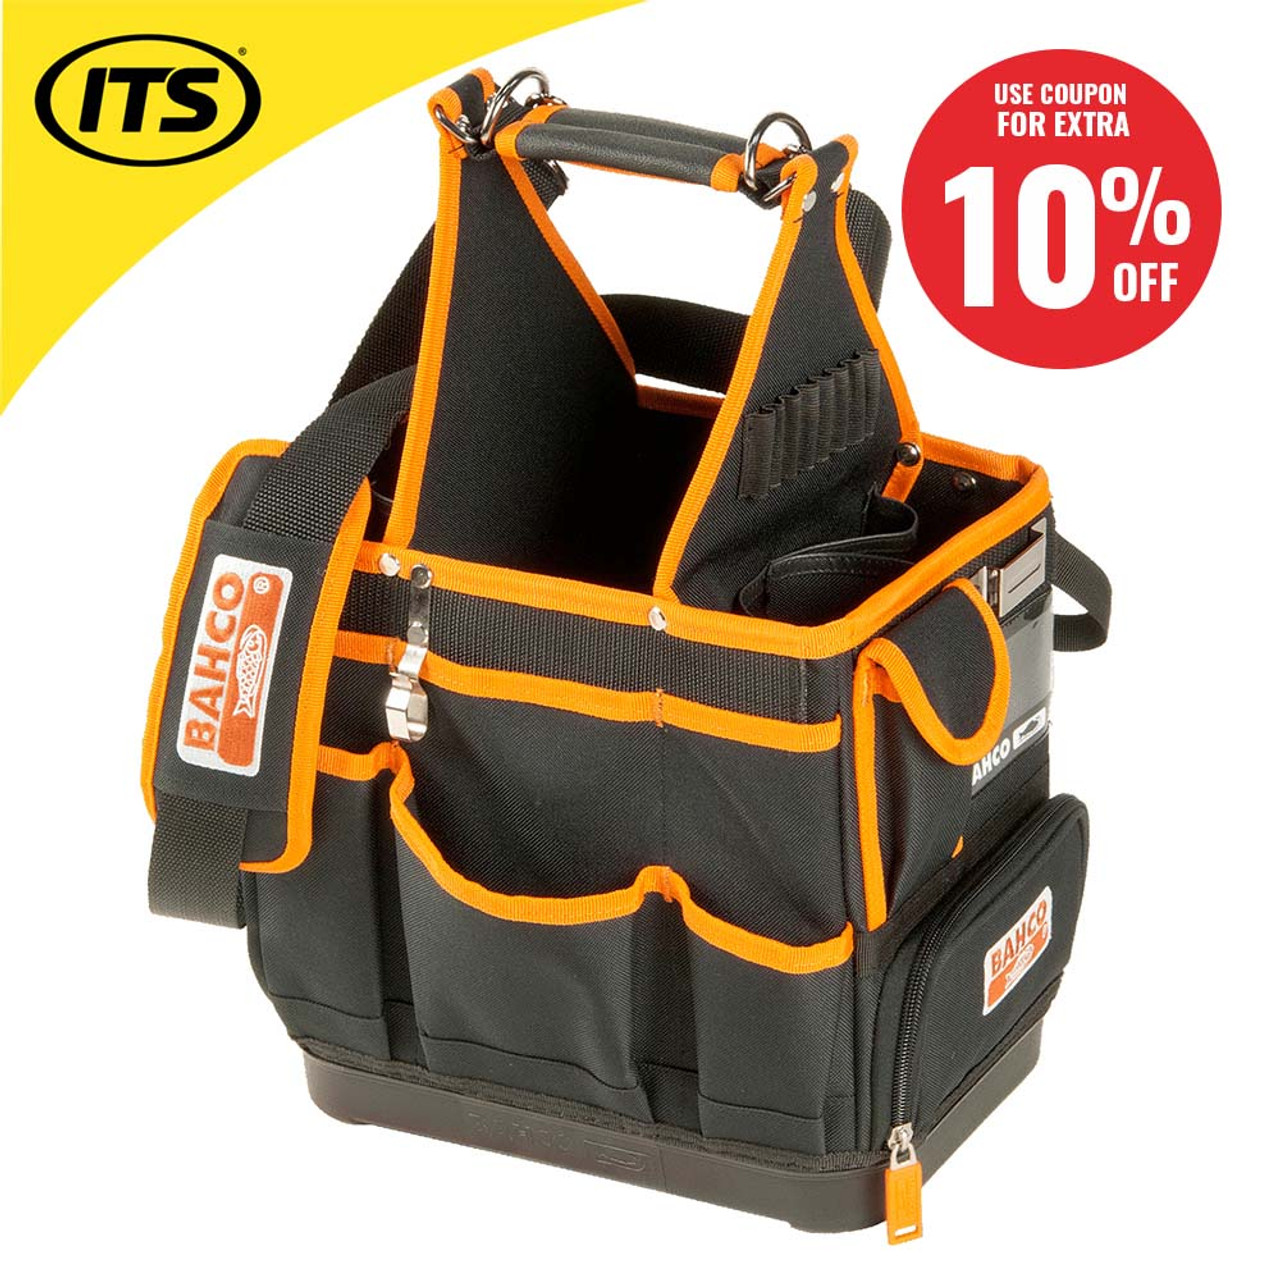 Bahco Electricians Bag Hard Bottom - 12in | ITS.co.uk|